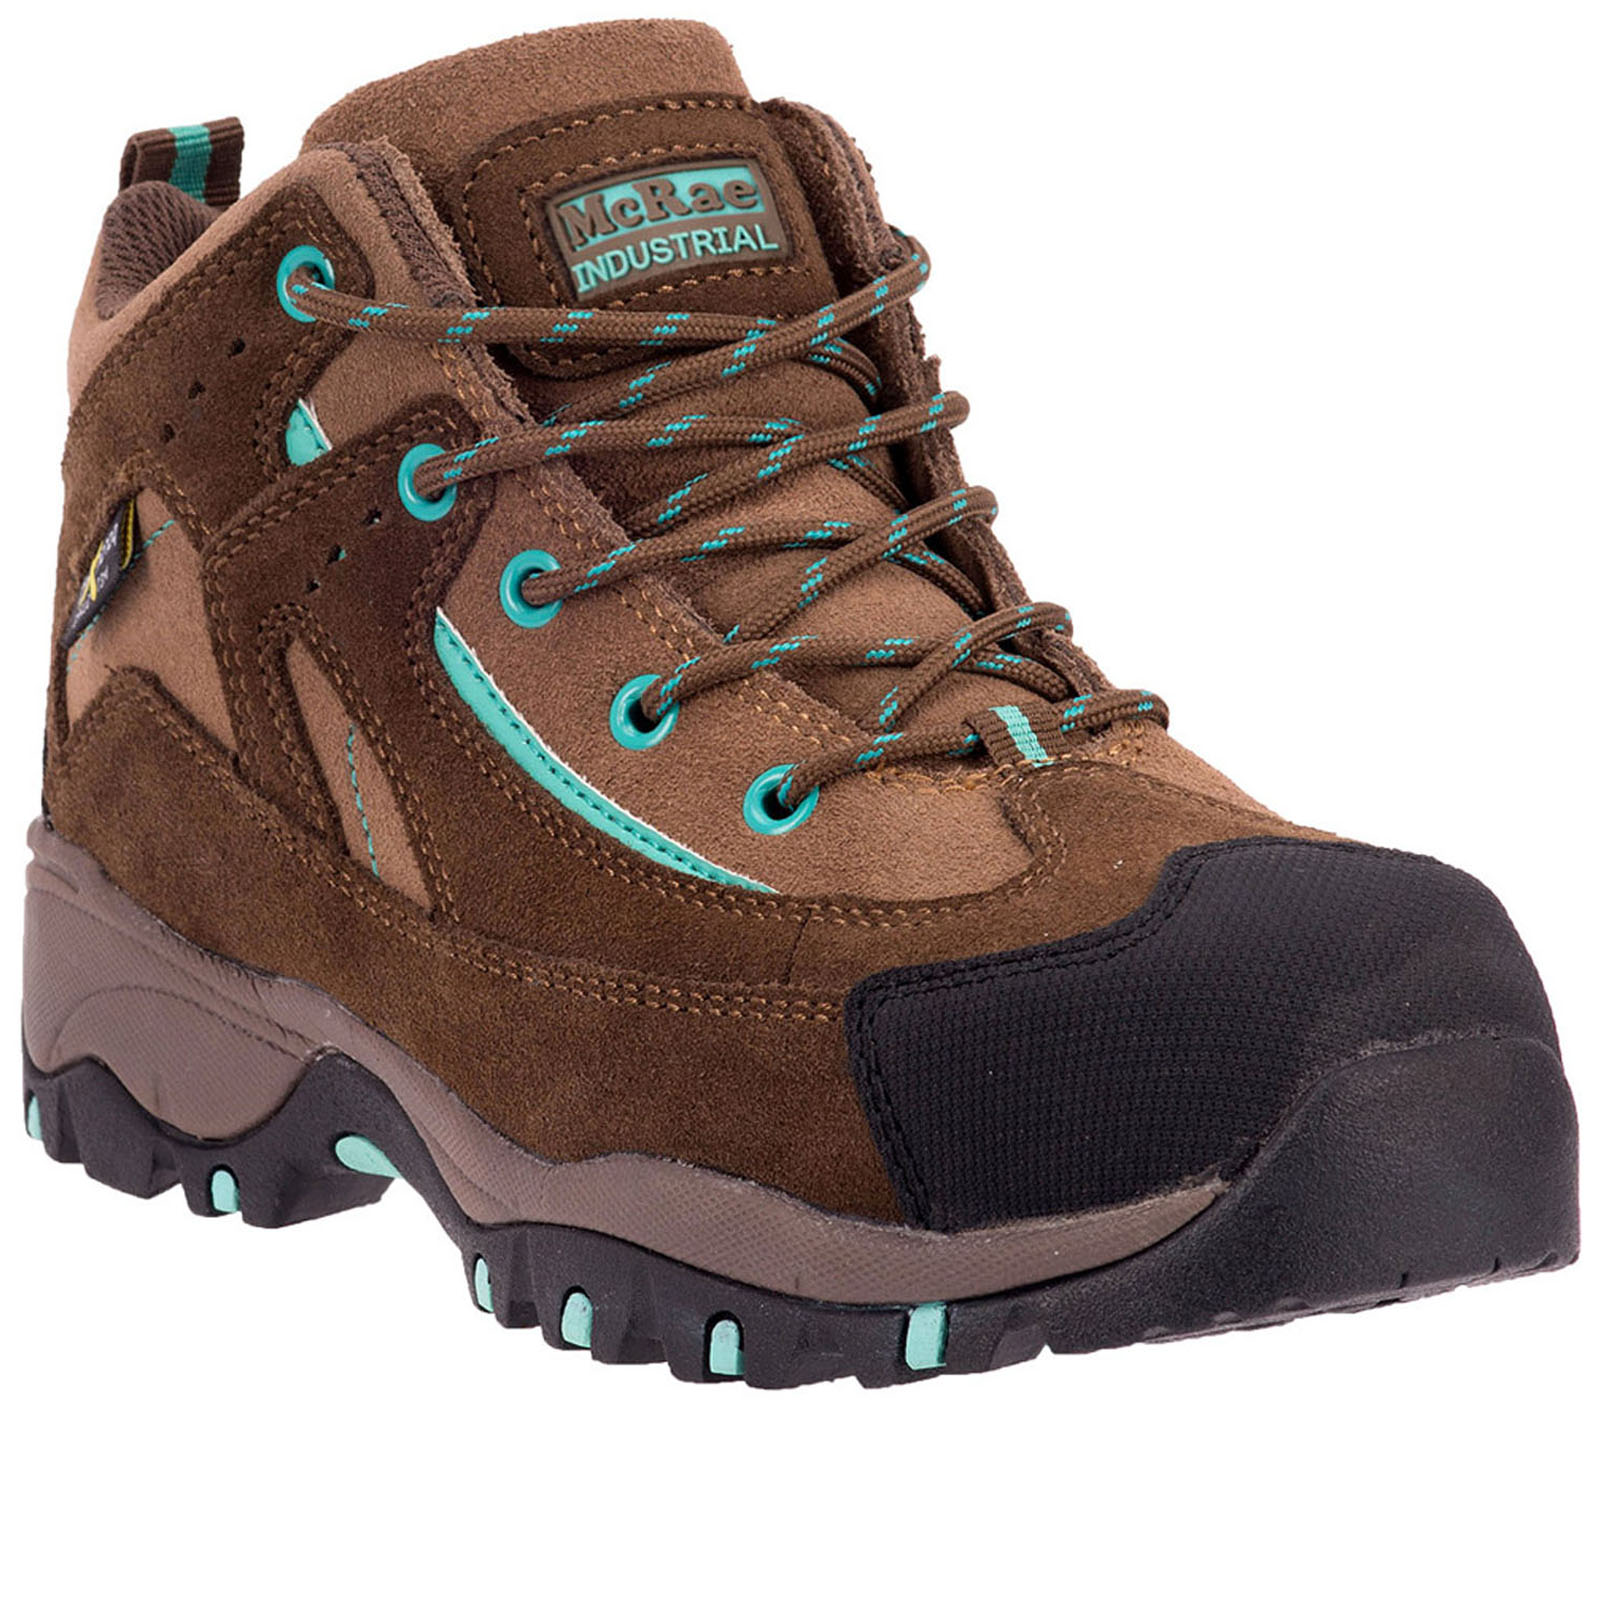 McRae Industrial Women's Brown Composite Toe Hiker - Wide Widths Available